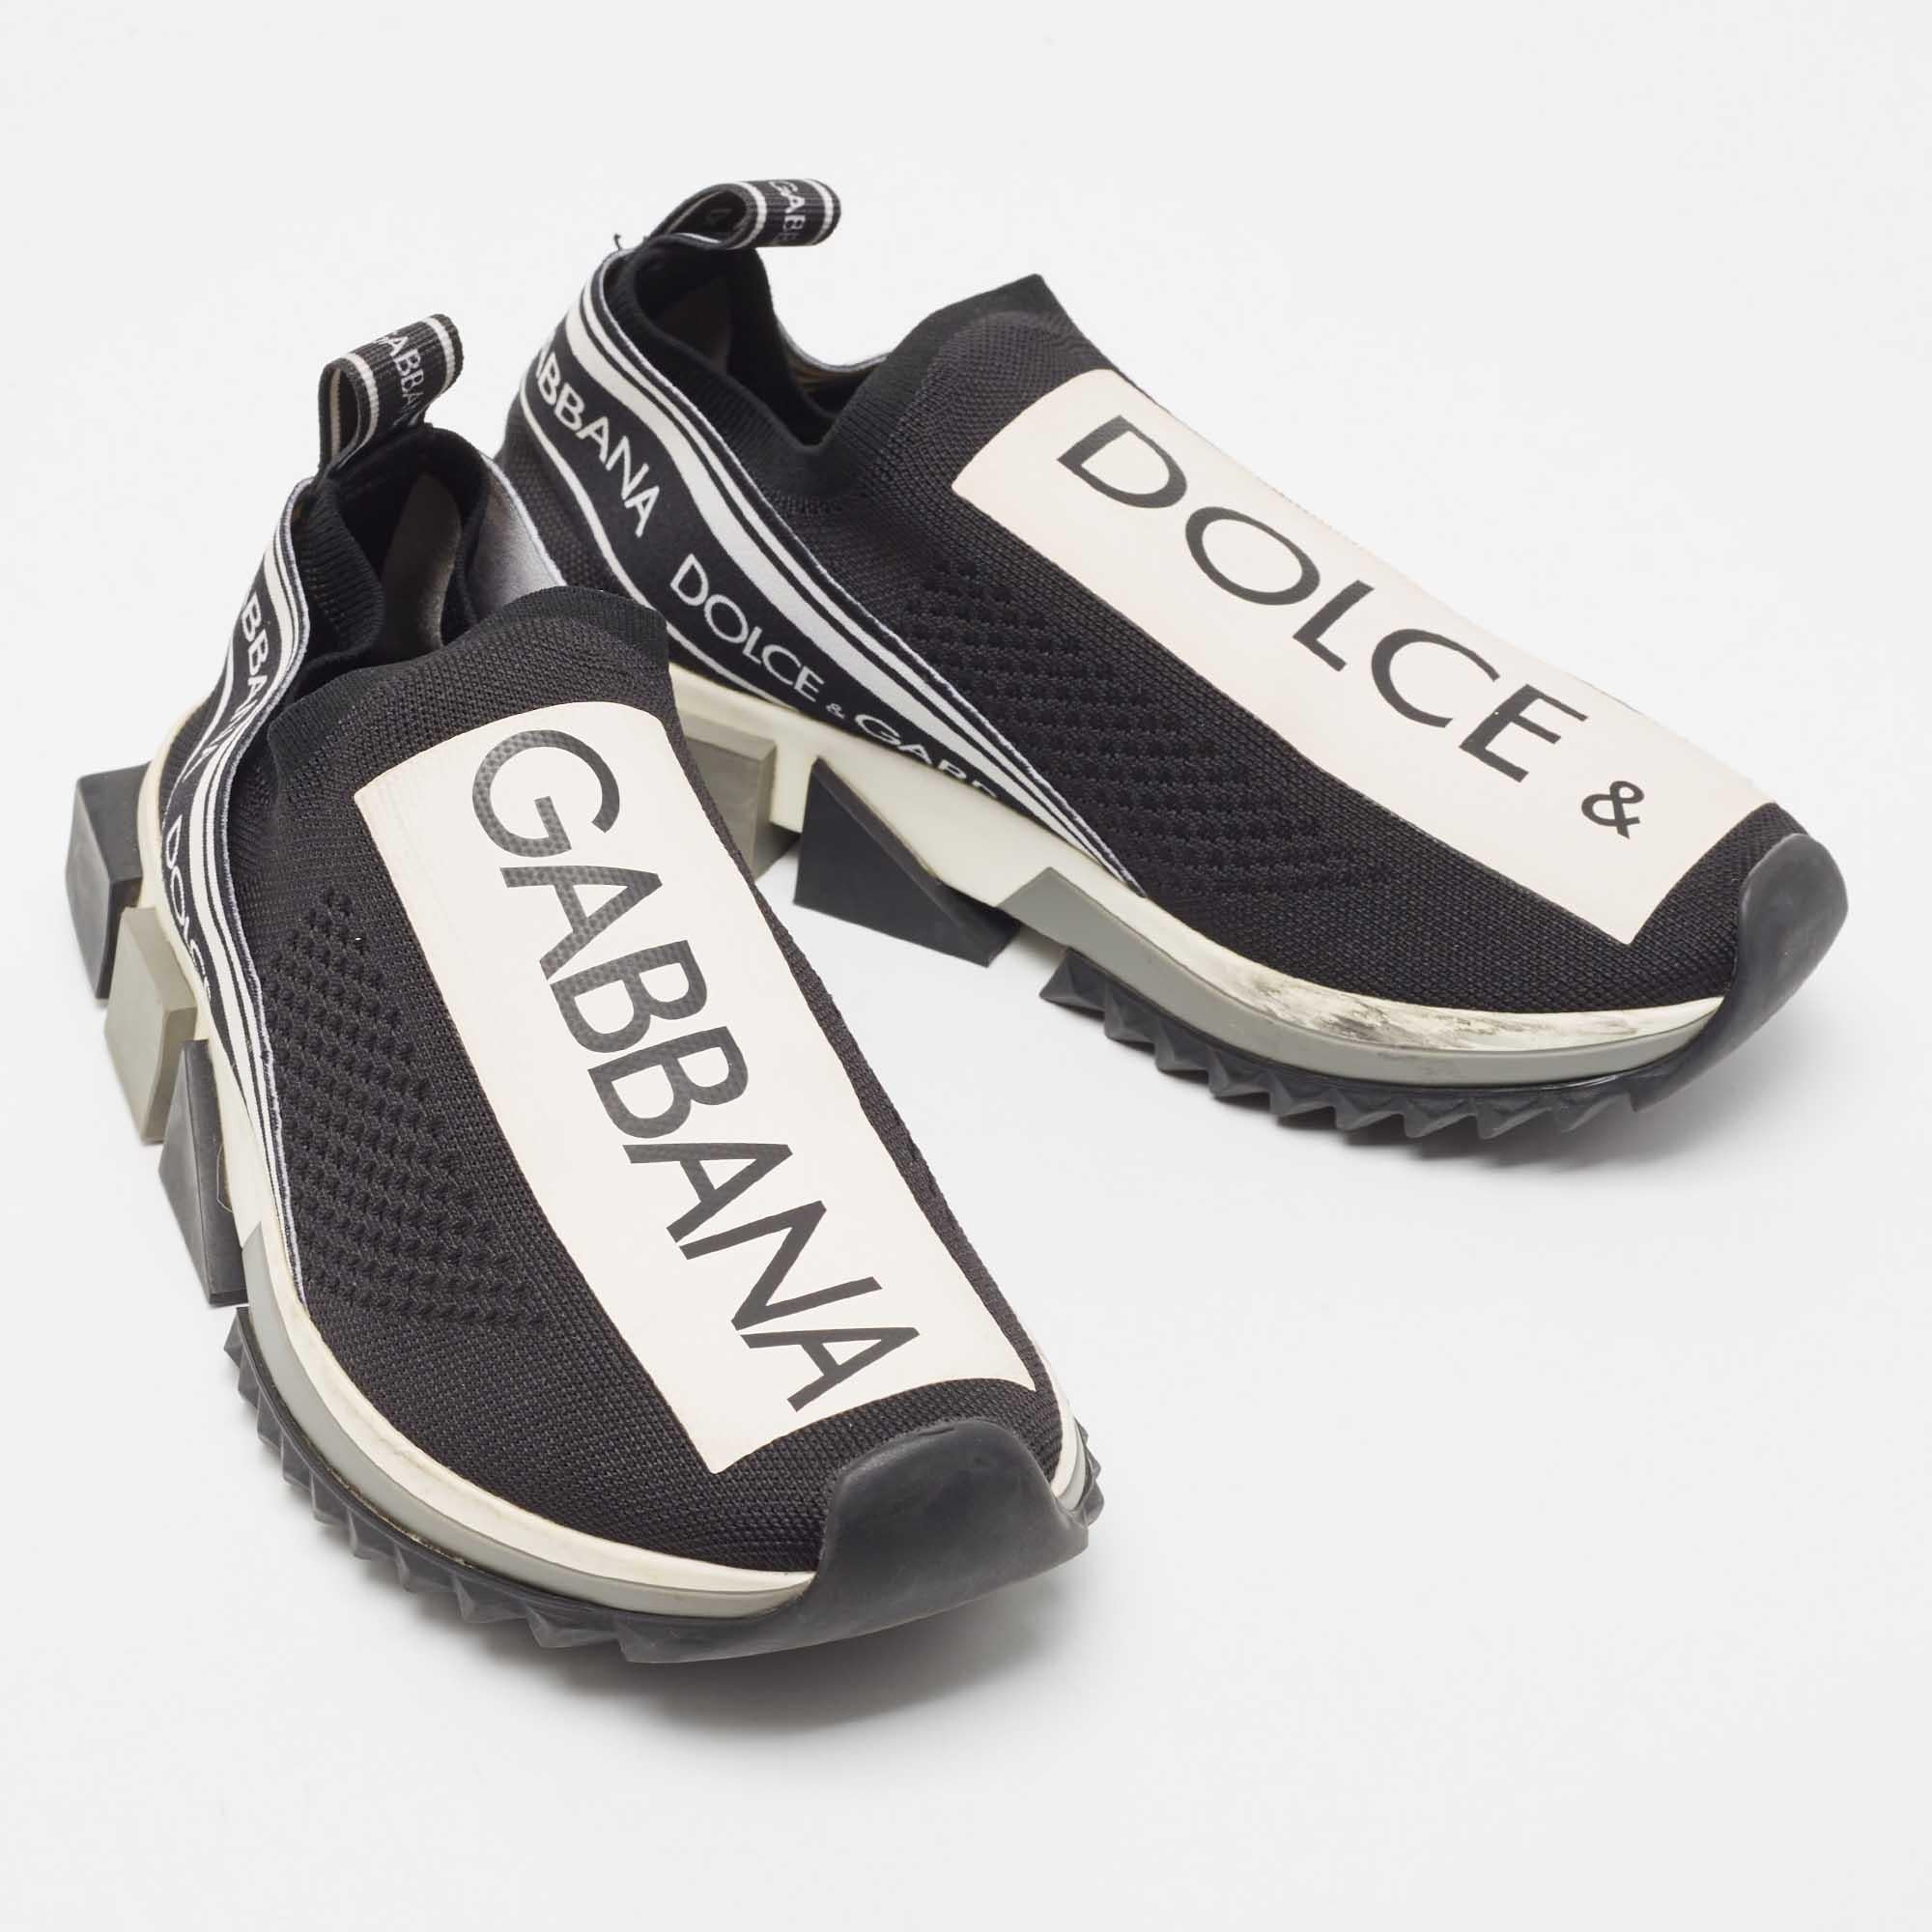 Upgrade your style with these Dolce & Gabbana sneakers. Meticulously designed for fashion and comfort, they're the ideal choice for a trendy and comfortable stride.

